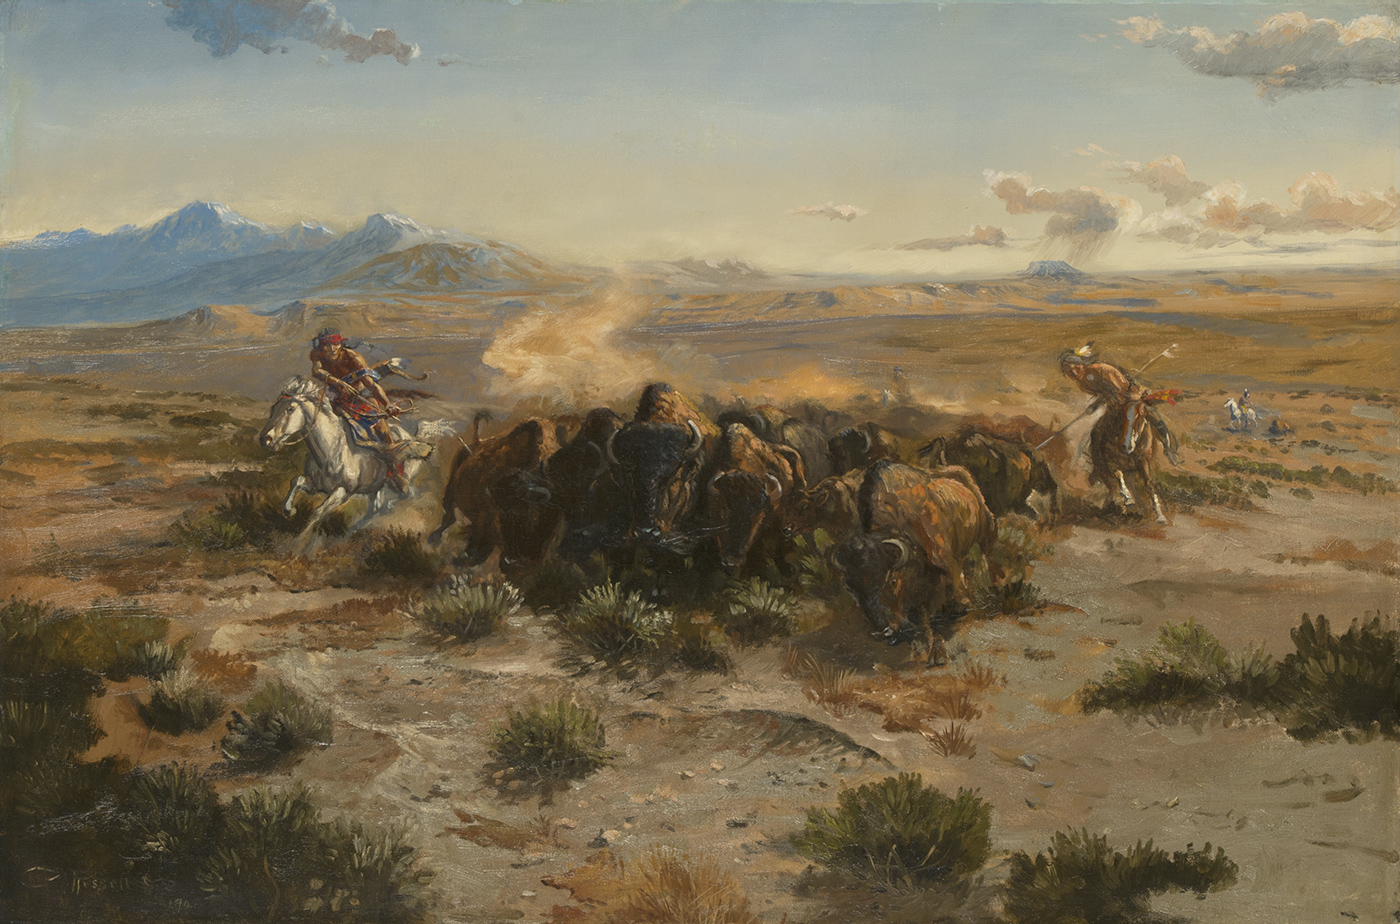 A herd of bison run forward while two indigenous American men on horseback flank them.